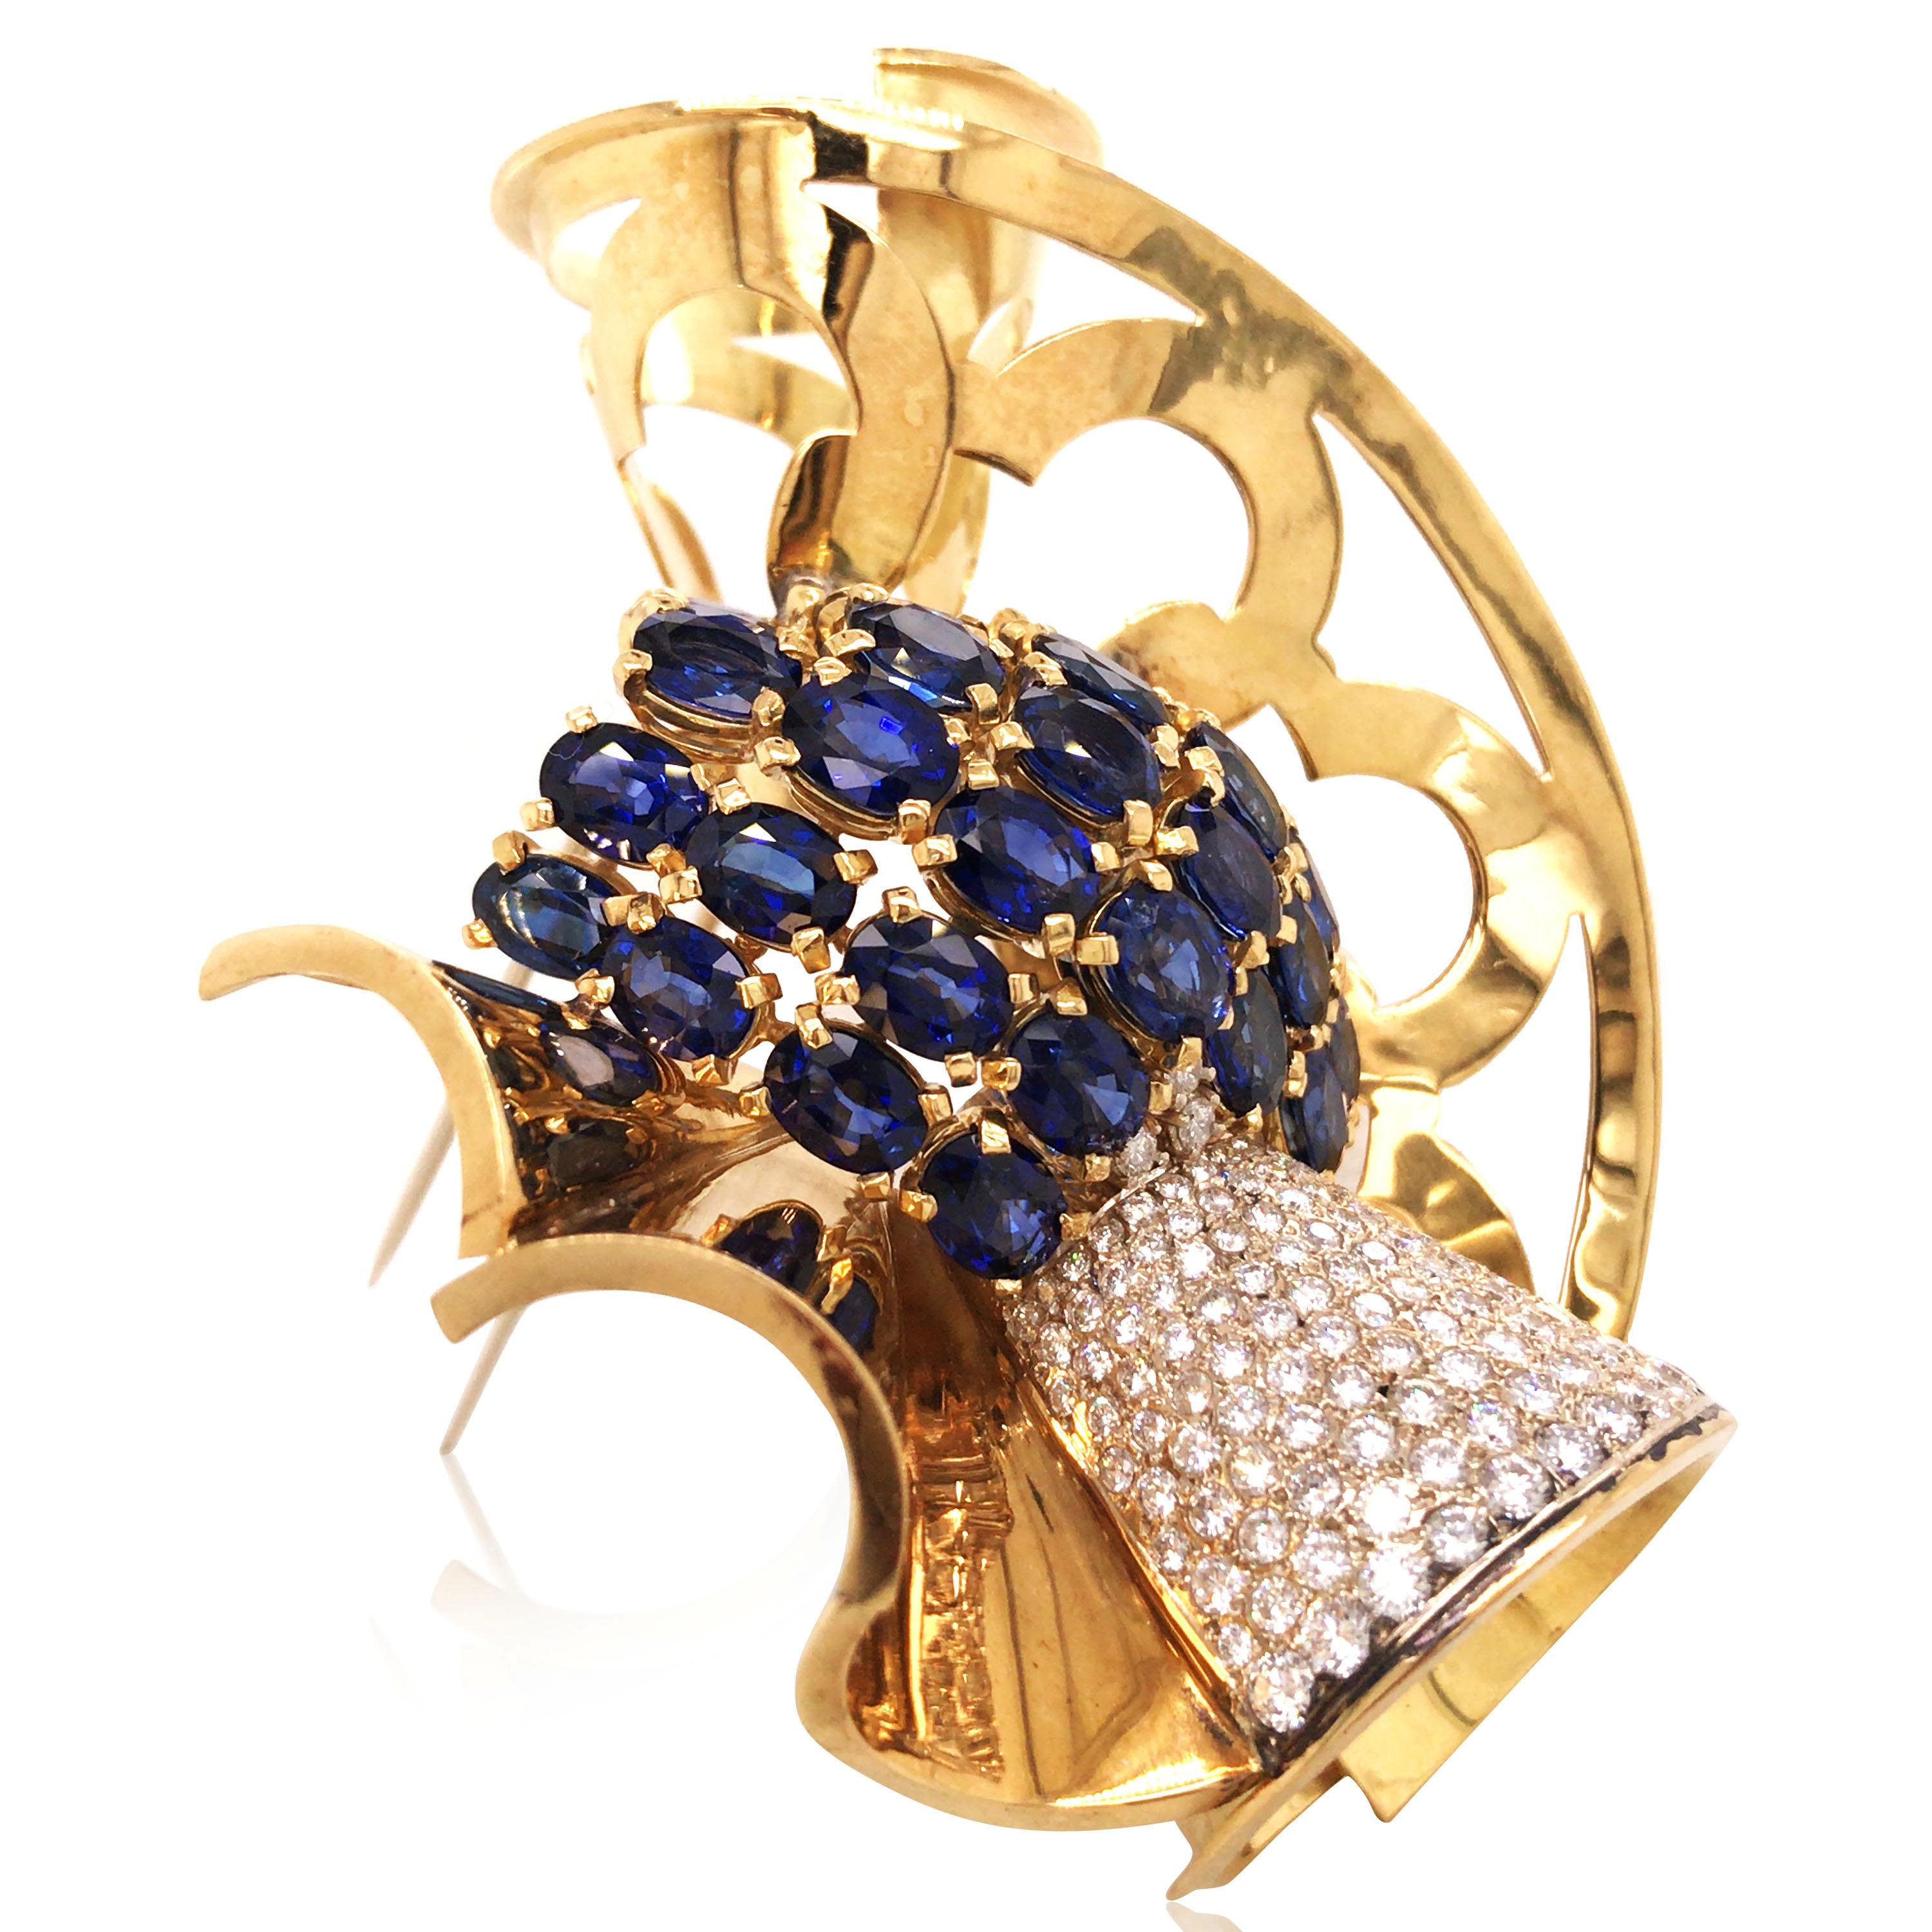 Designed as a scrolling openwork brooch with conical shaped elements, one pavé-set with circular-cut diamonds, total approx. 6.0ct, centered by oval-cut sapphires; sapphire total approx. 15.0ct.

Weight: 57.4 grams
Measurement: 8.3 x 6.4 x 2.5 cm 